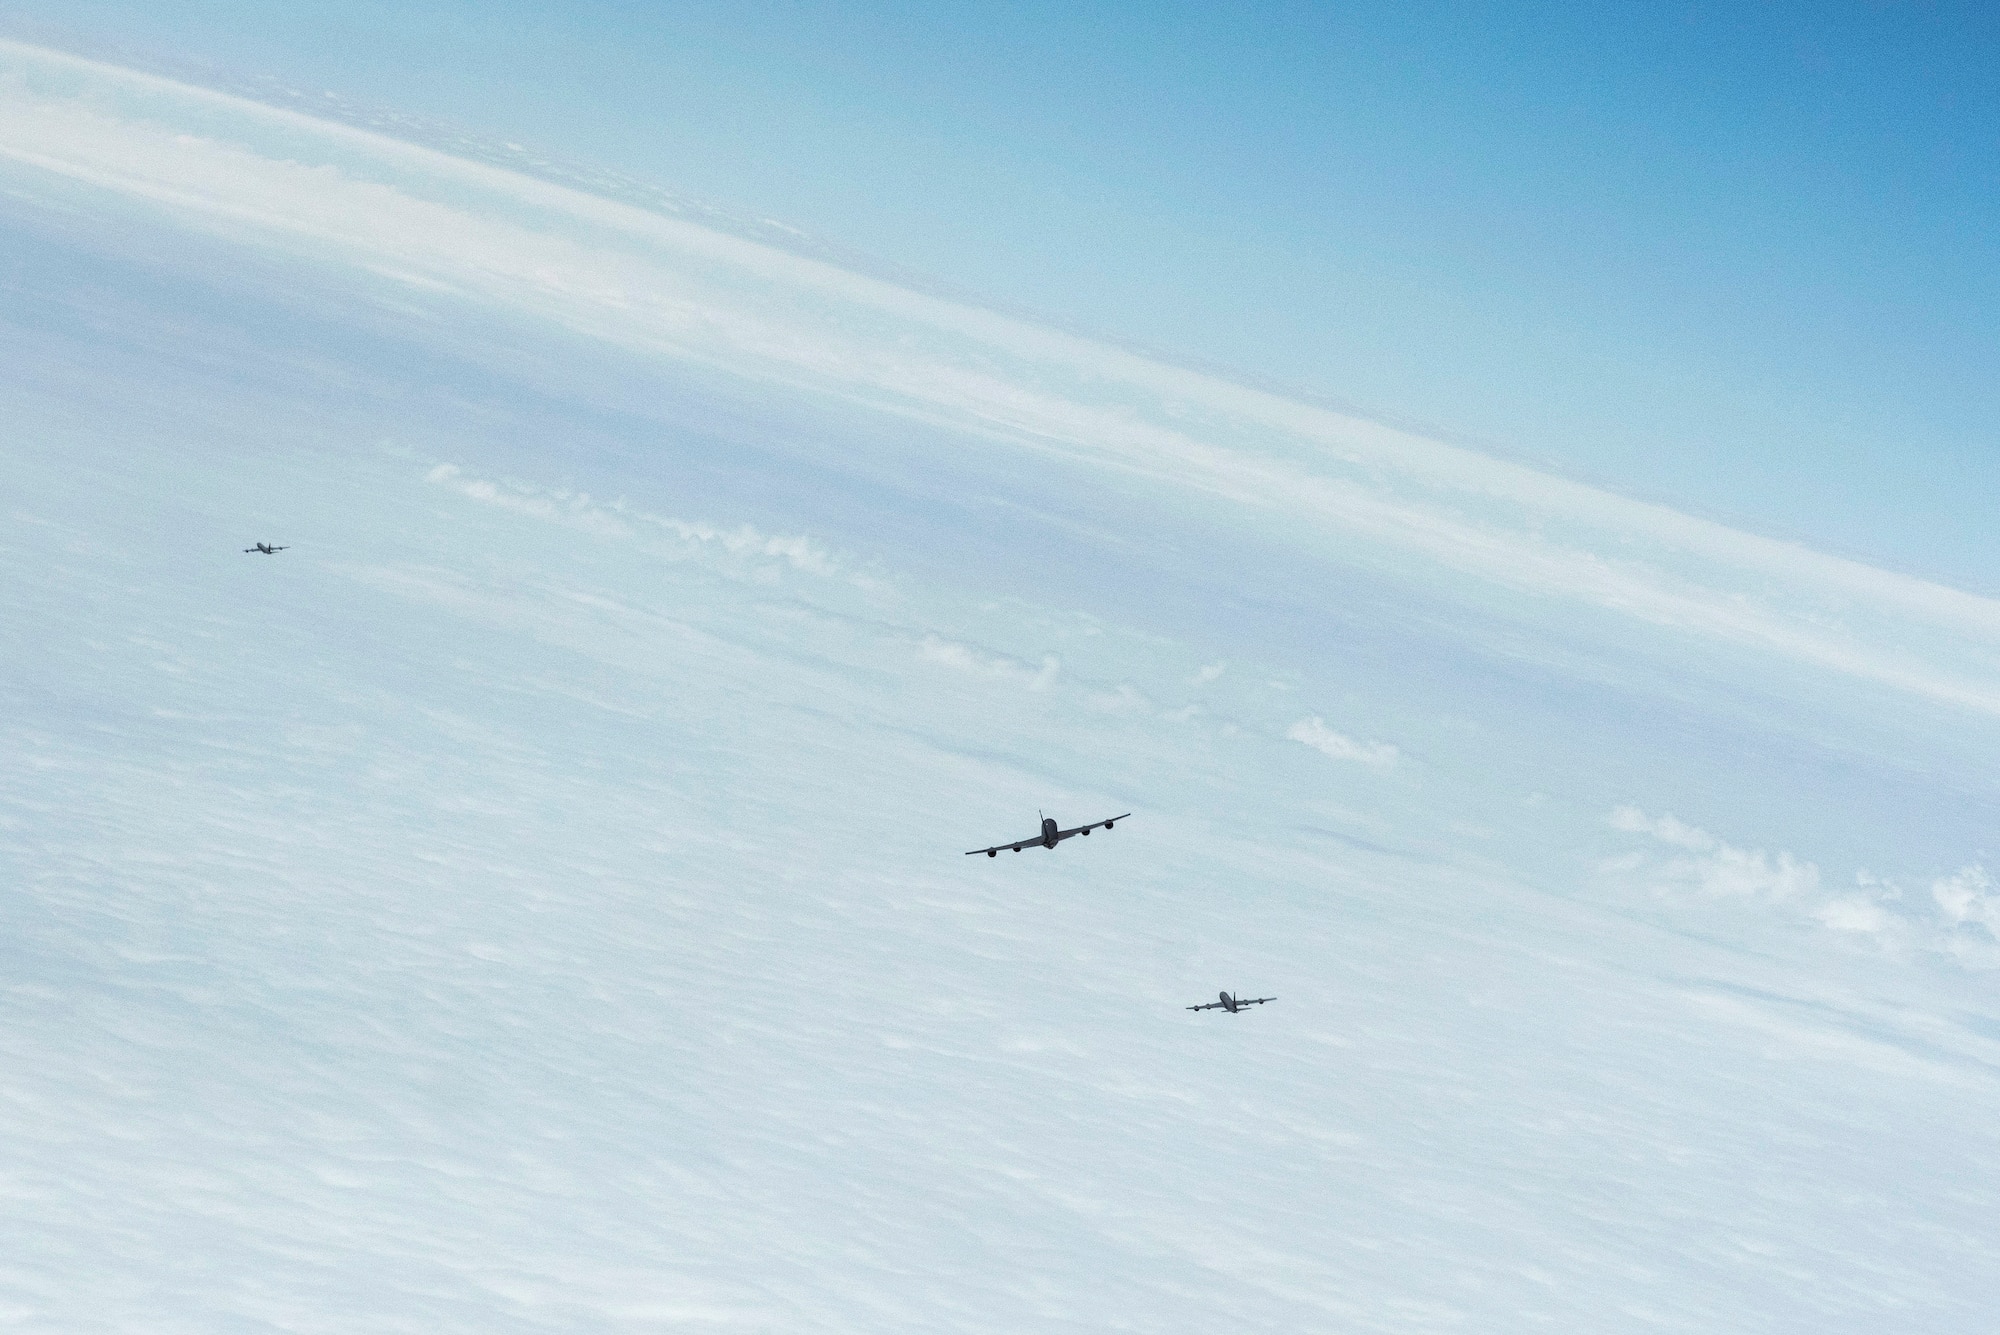 U.S. Air Force KC-135 Stratotankers assigned to 22nd Expeditionary Air Refueling Squadron fly in formation with Turkish air force KC-135 Stratotankers assigned to 10th Tanker Base, Incirlik Air Base, Turkey, over the Black Sea during a Bomber Task Force mission May 29, 2020. Training with our NATO allies and theater partner nations contributes to enhanced resiliency and interoperability and enables us to build enduring relationships necessary to confront the broad range of global challenges. (U.S. Air Force photo by Staff Sgt. Joshua Magbanua)